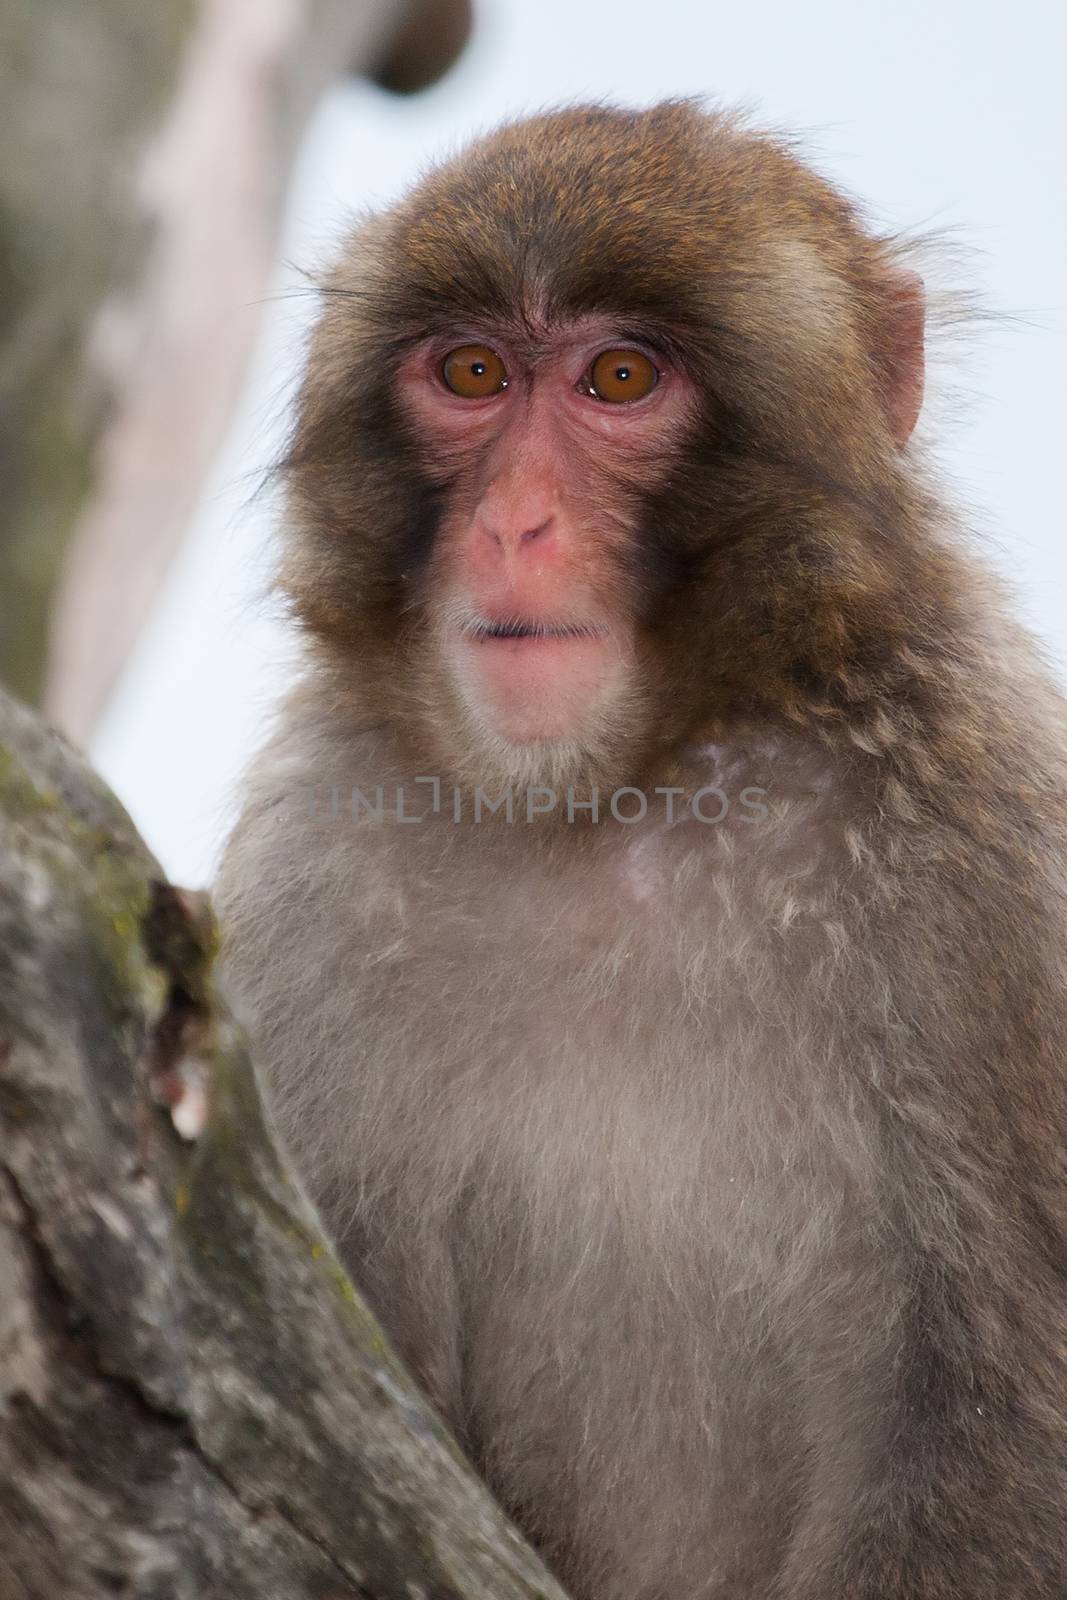 Macaque (Snow) Monkey's playing in a tree